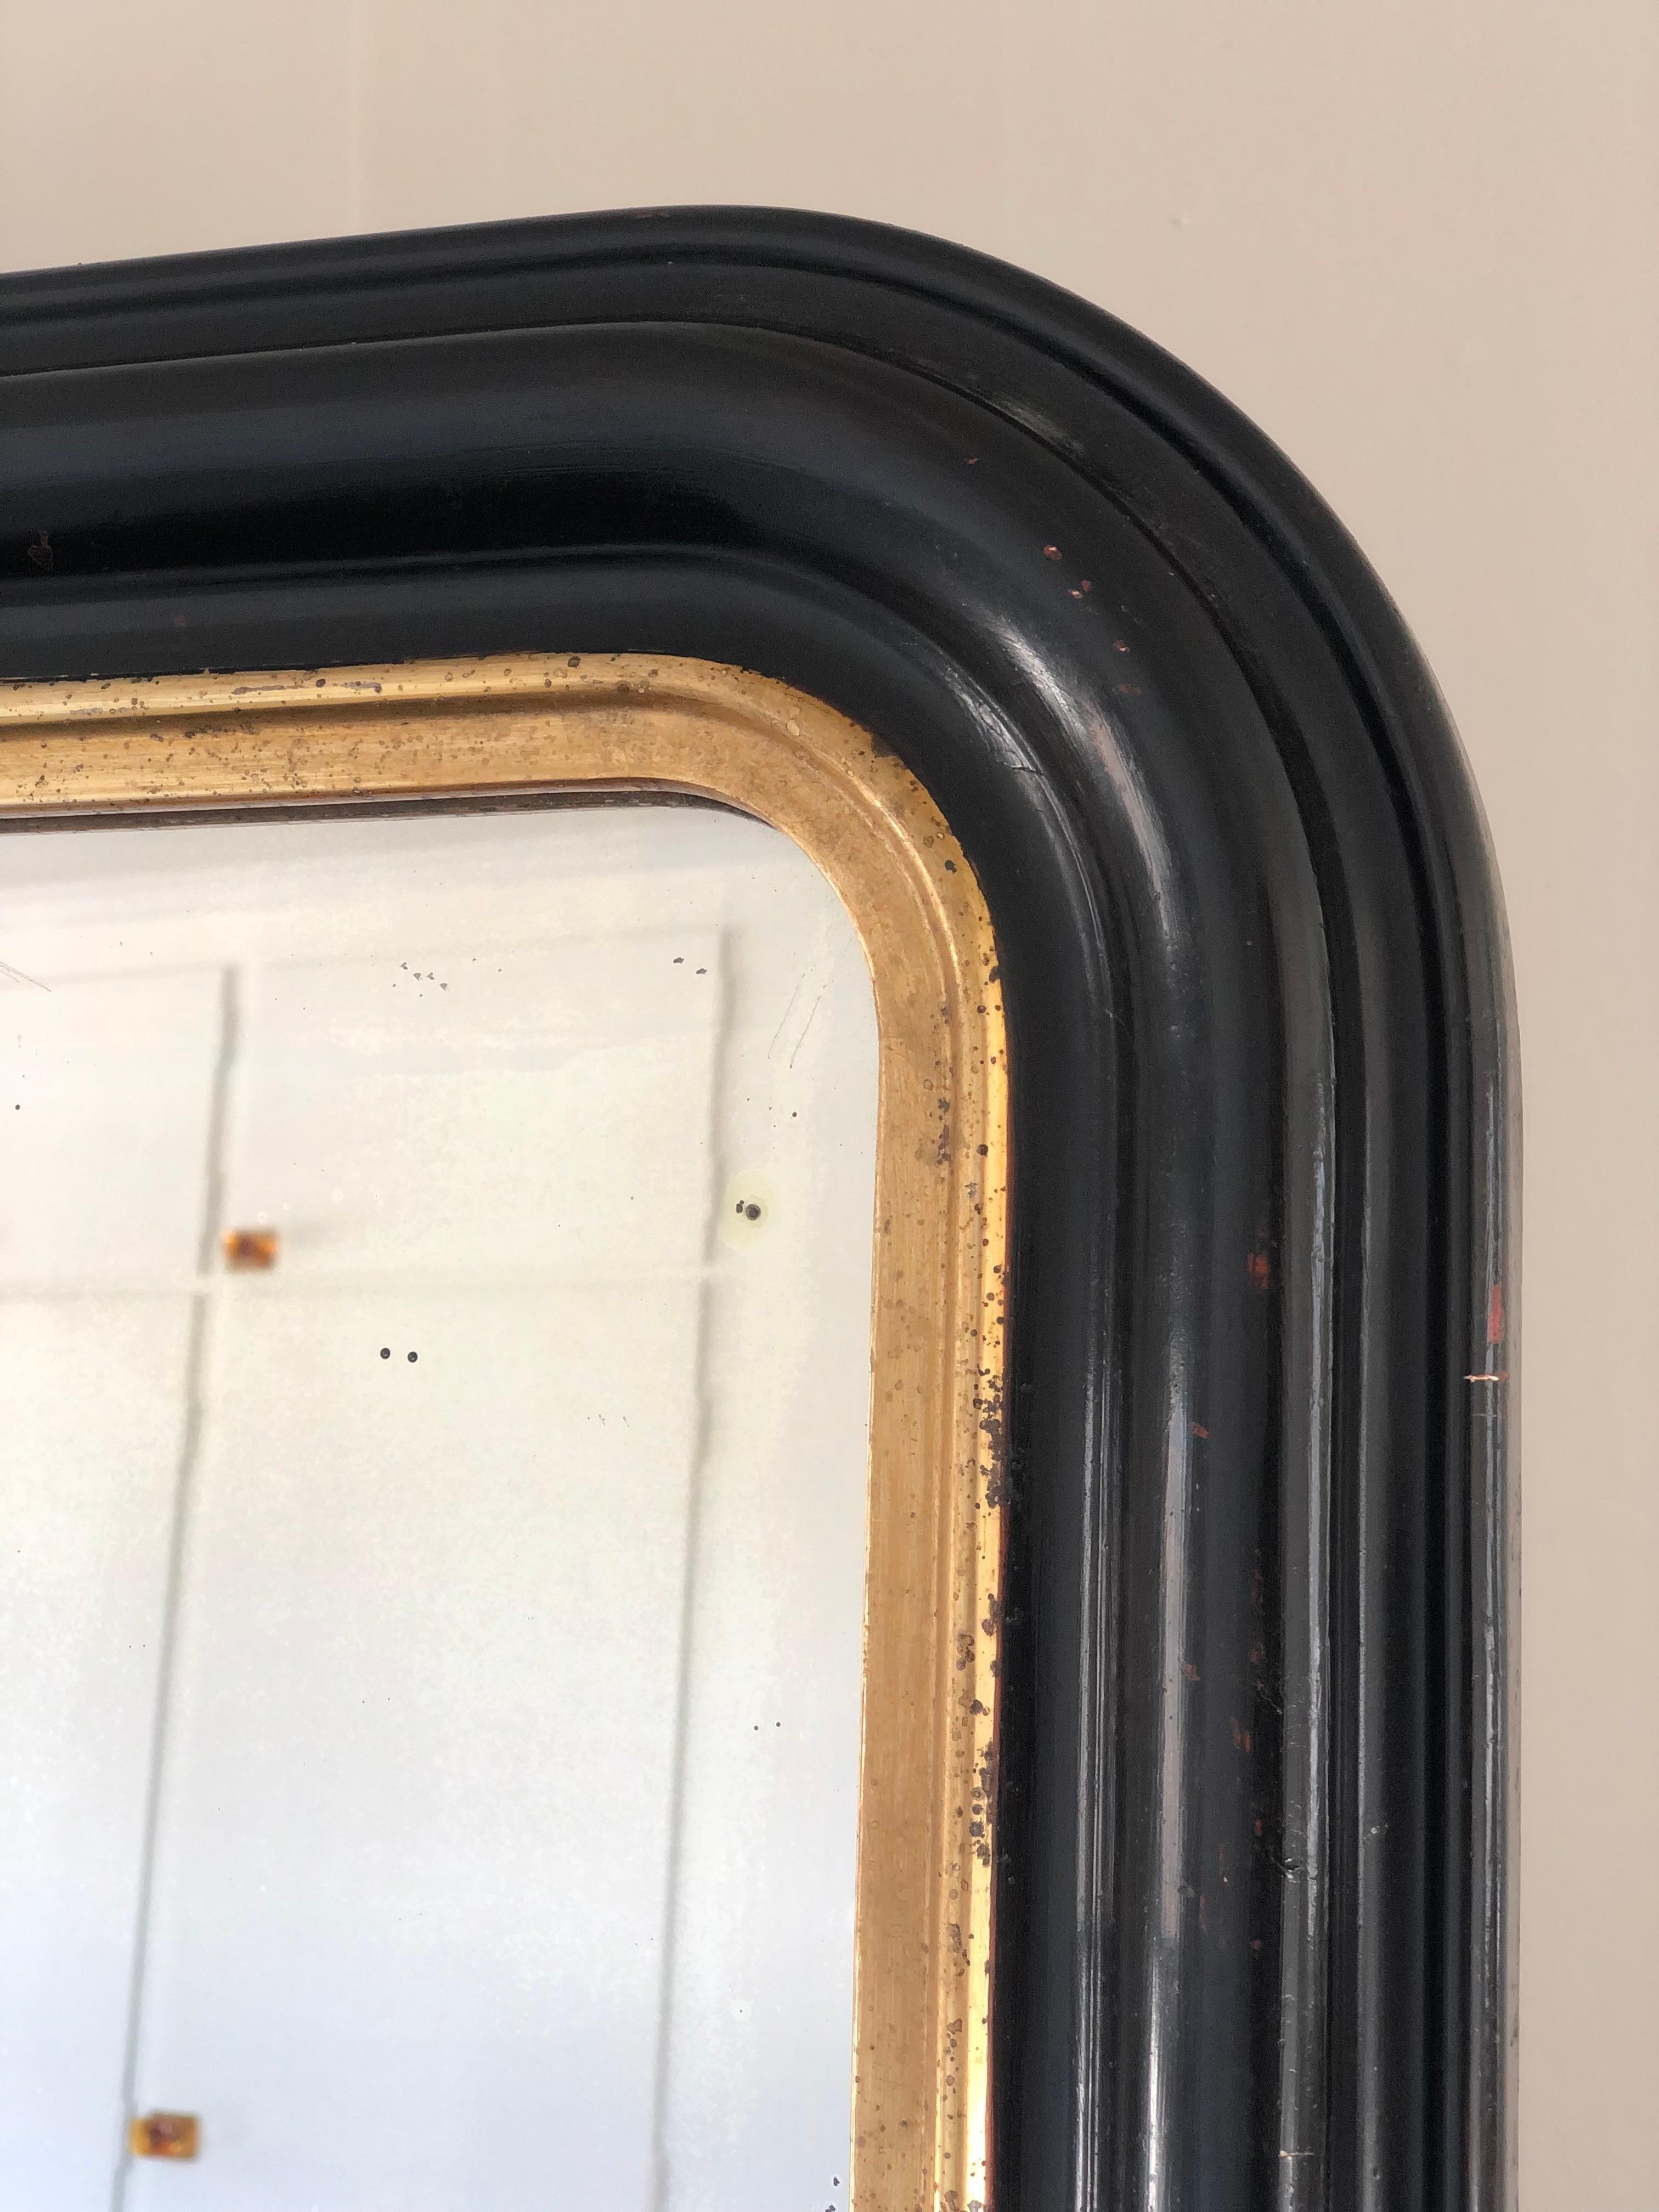 A very high-quality antique Louis Philippe mirror from France, late 19th century. An appearance with grandeur. The richly carved frame with curved top corners in black has a giltwood edge. Original mercury glass and back.

Beautifully weathered